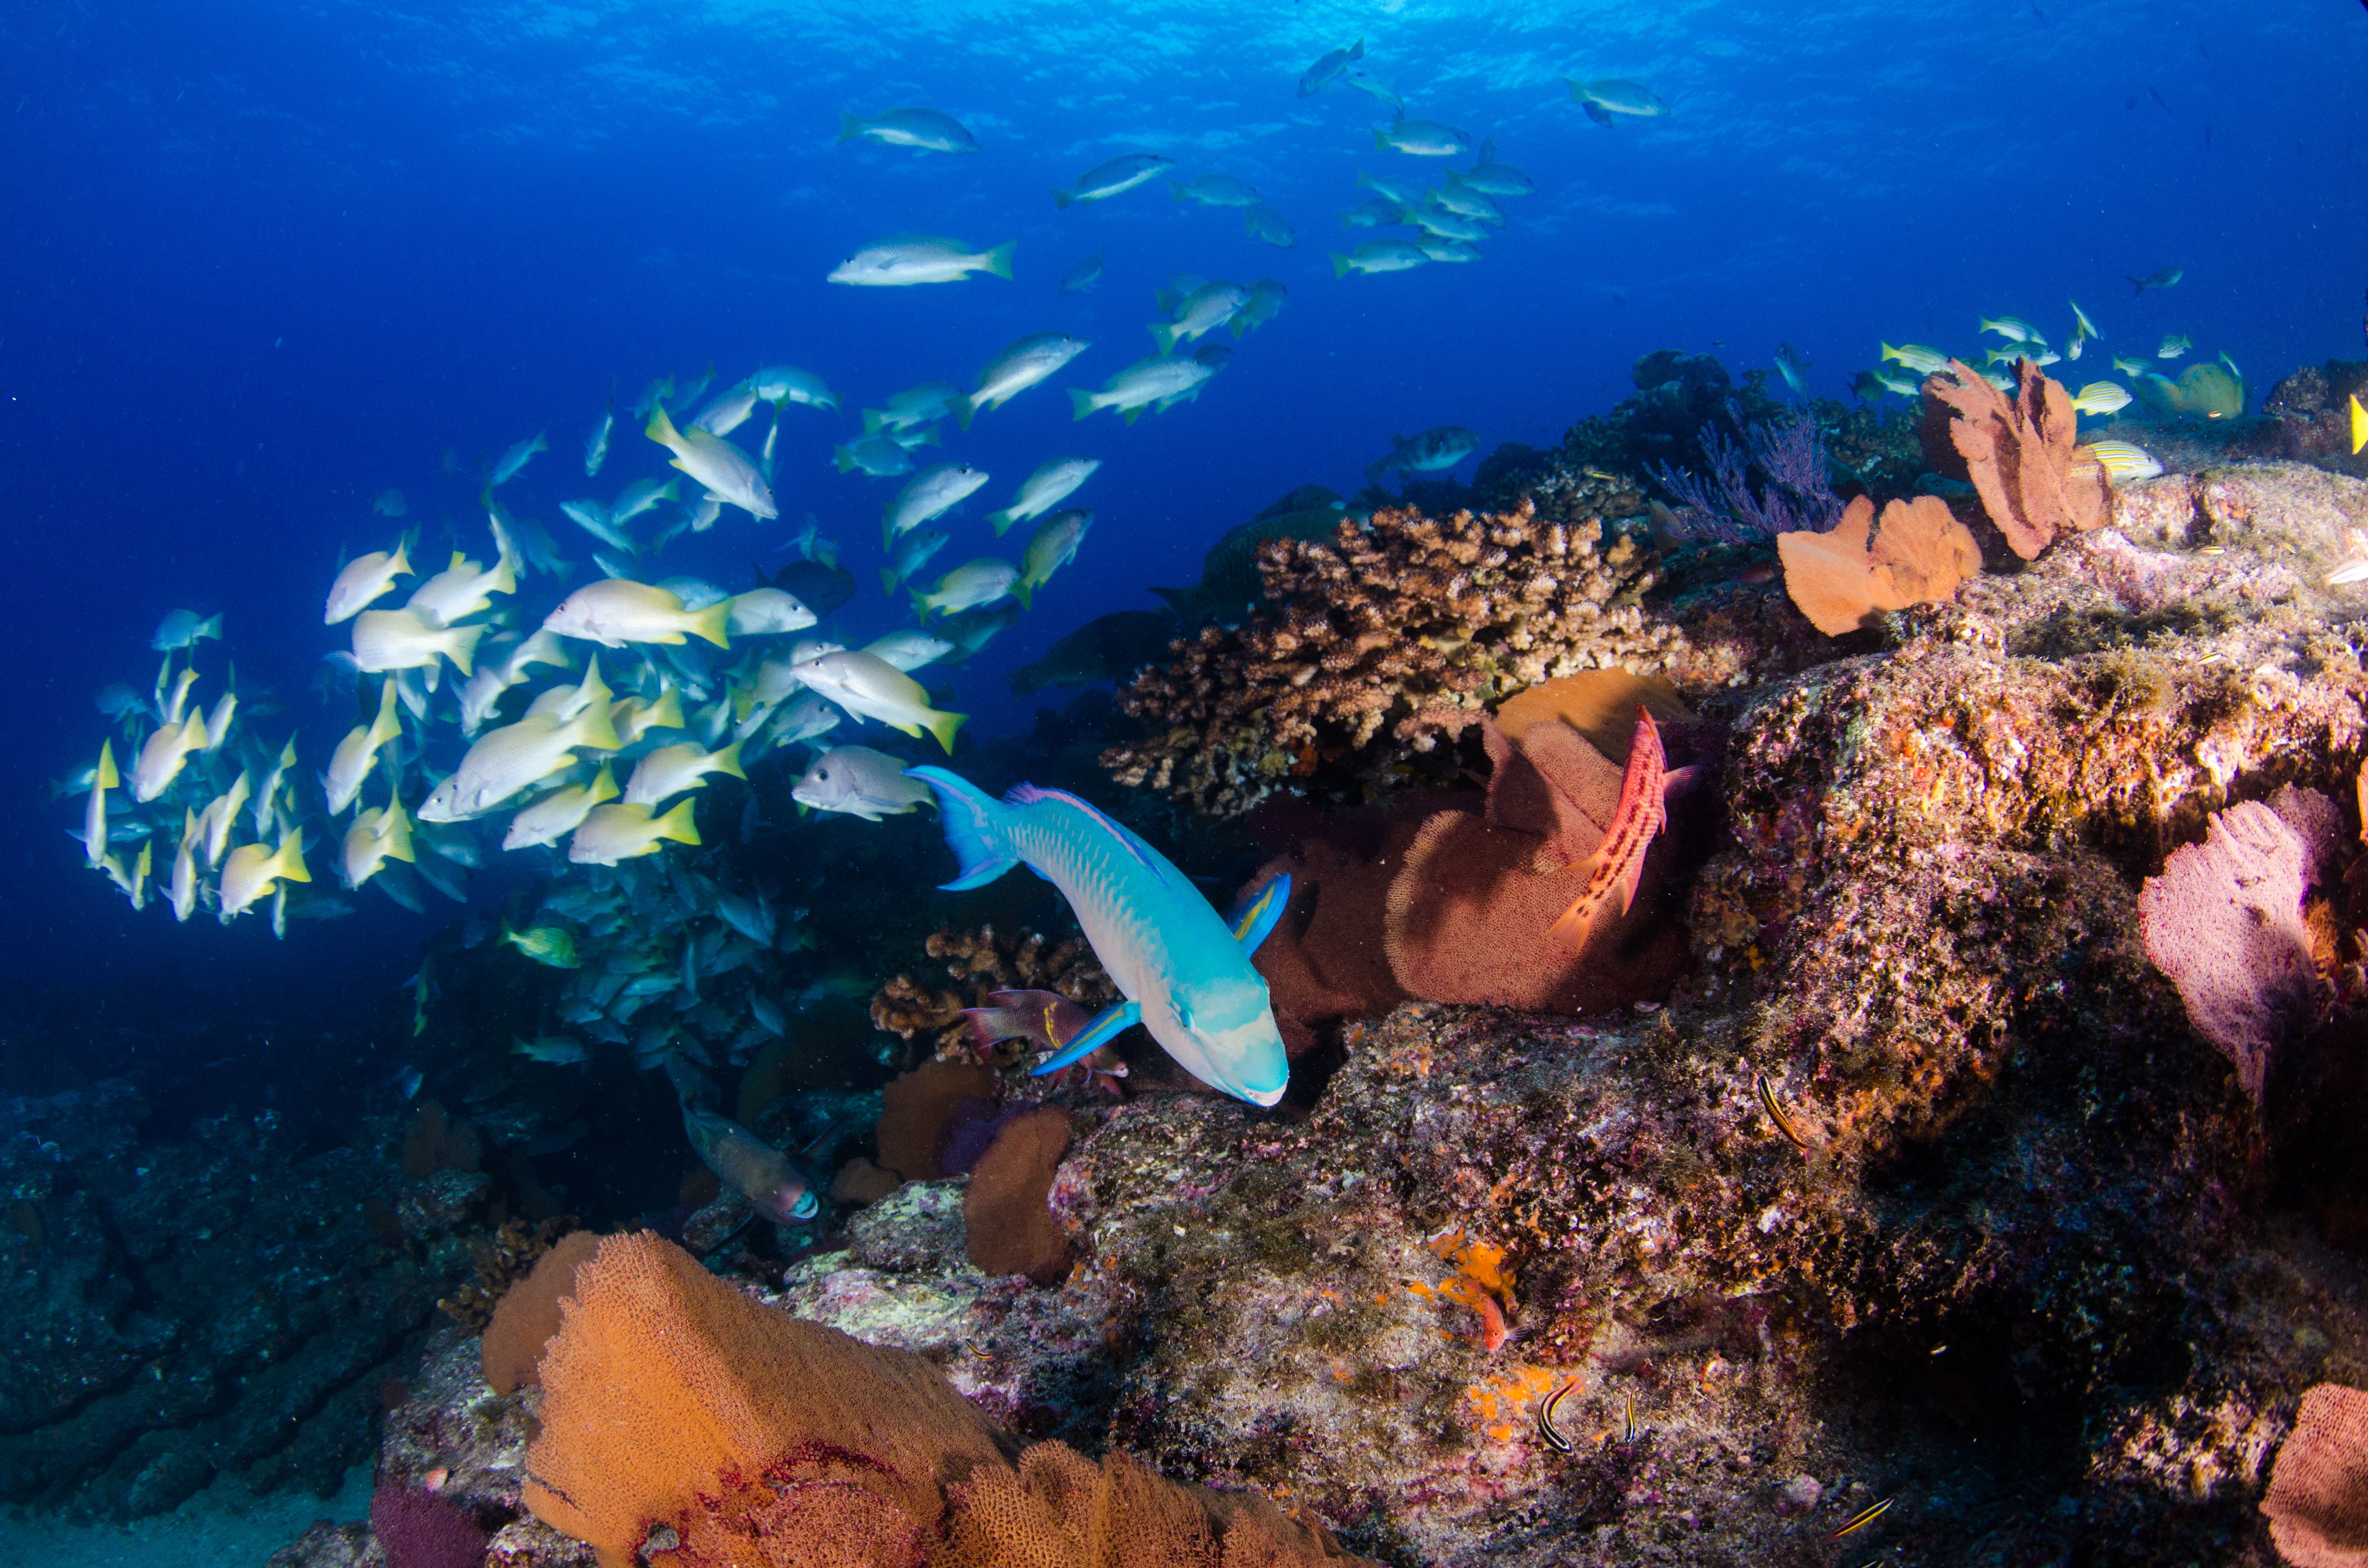 Diving in the warm waters of the Isla Natividad is a fabulous experience